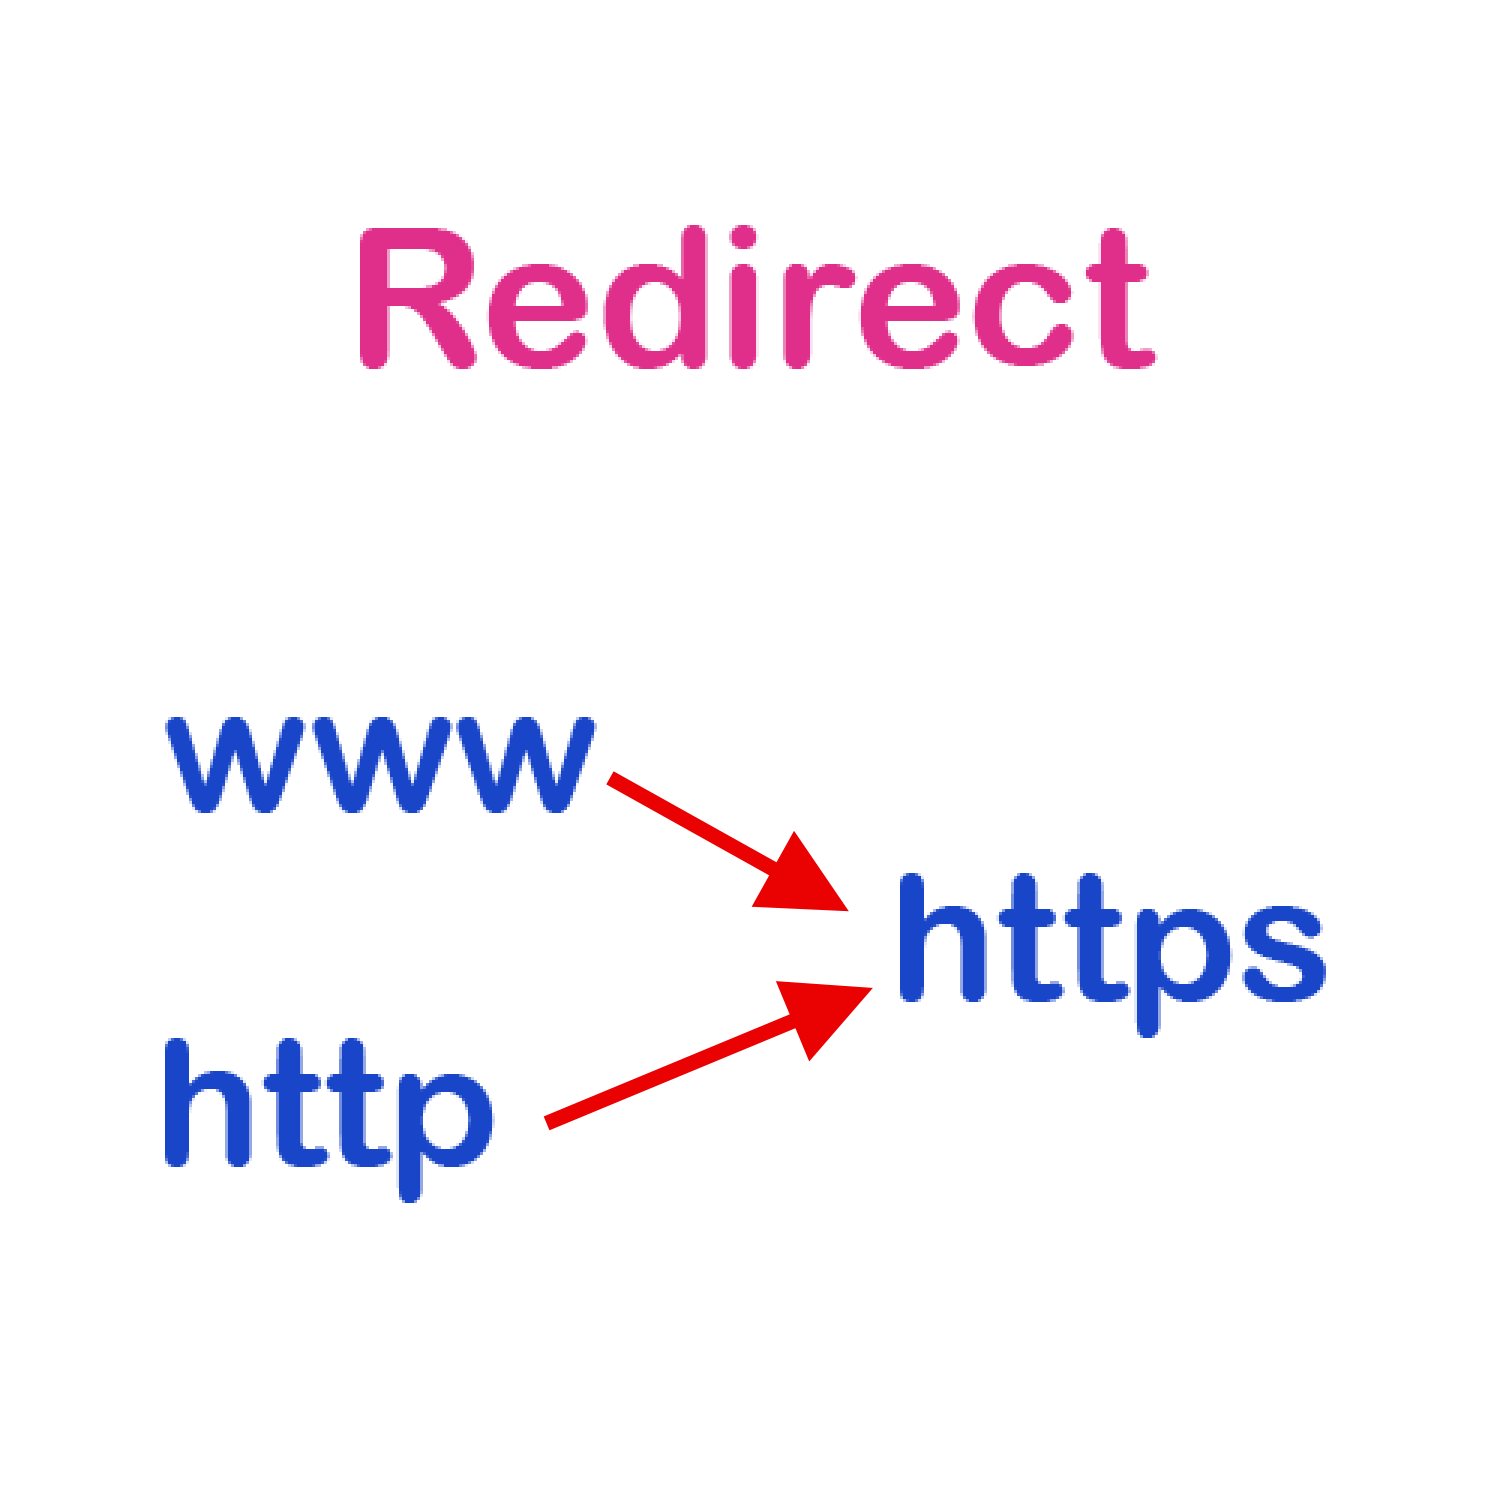 Redirect www, http to https